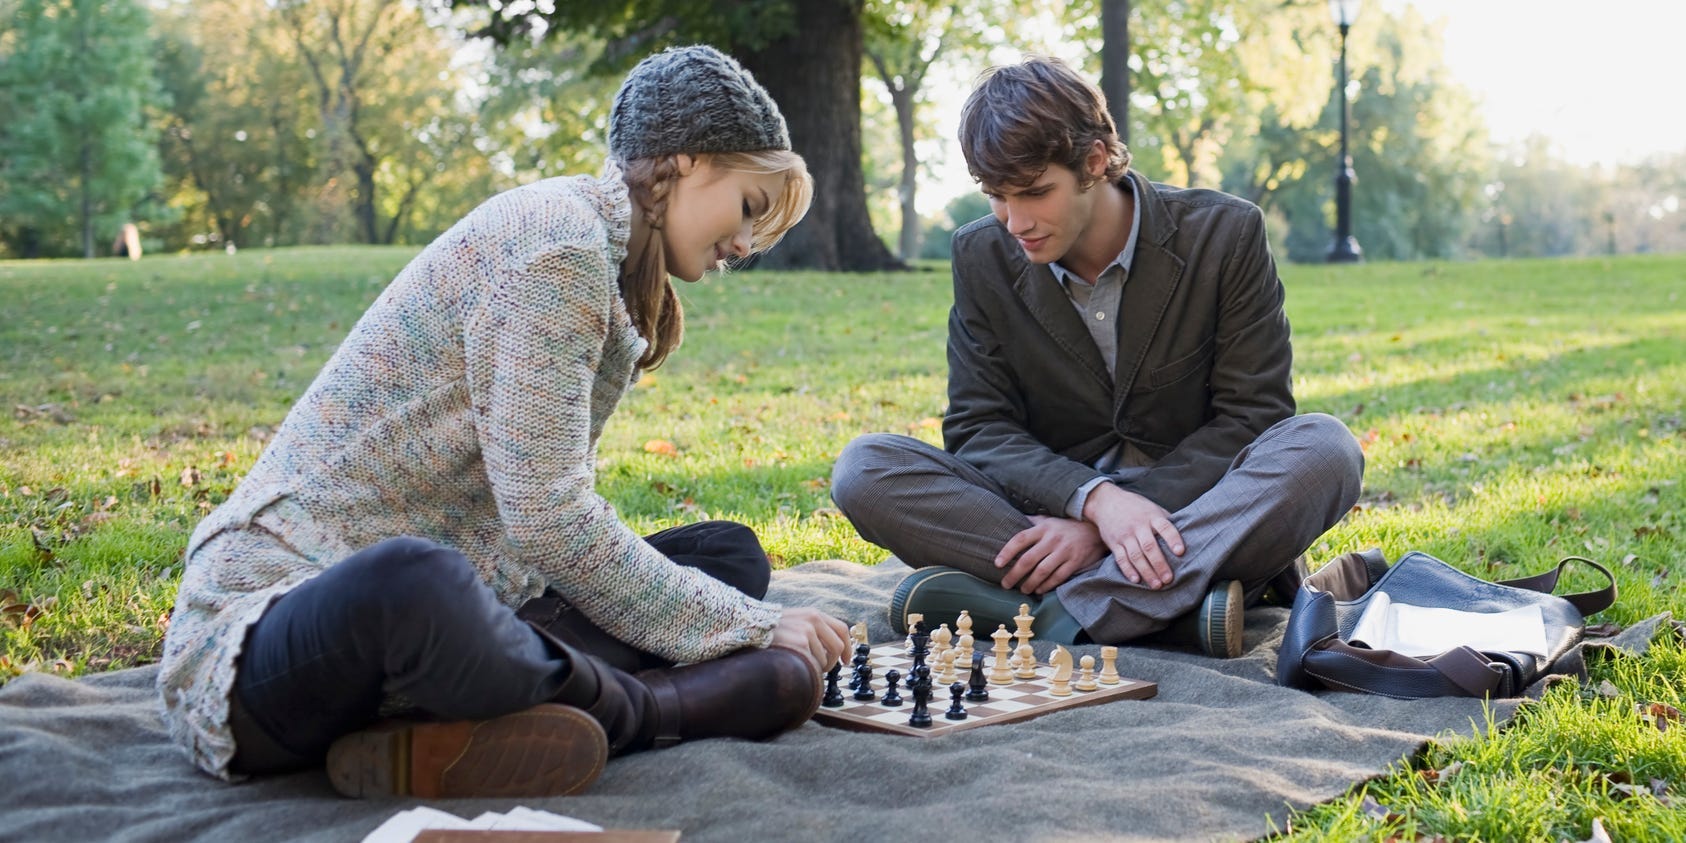 A couple plays chess in the park.